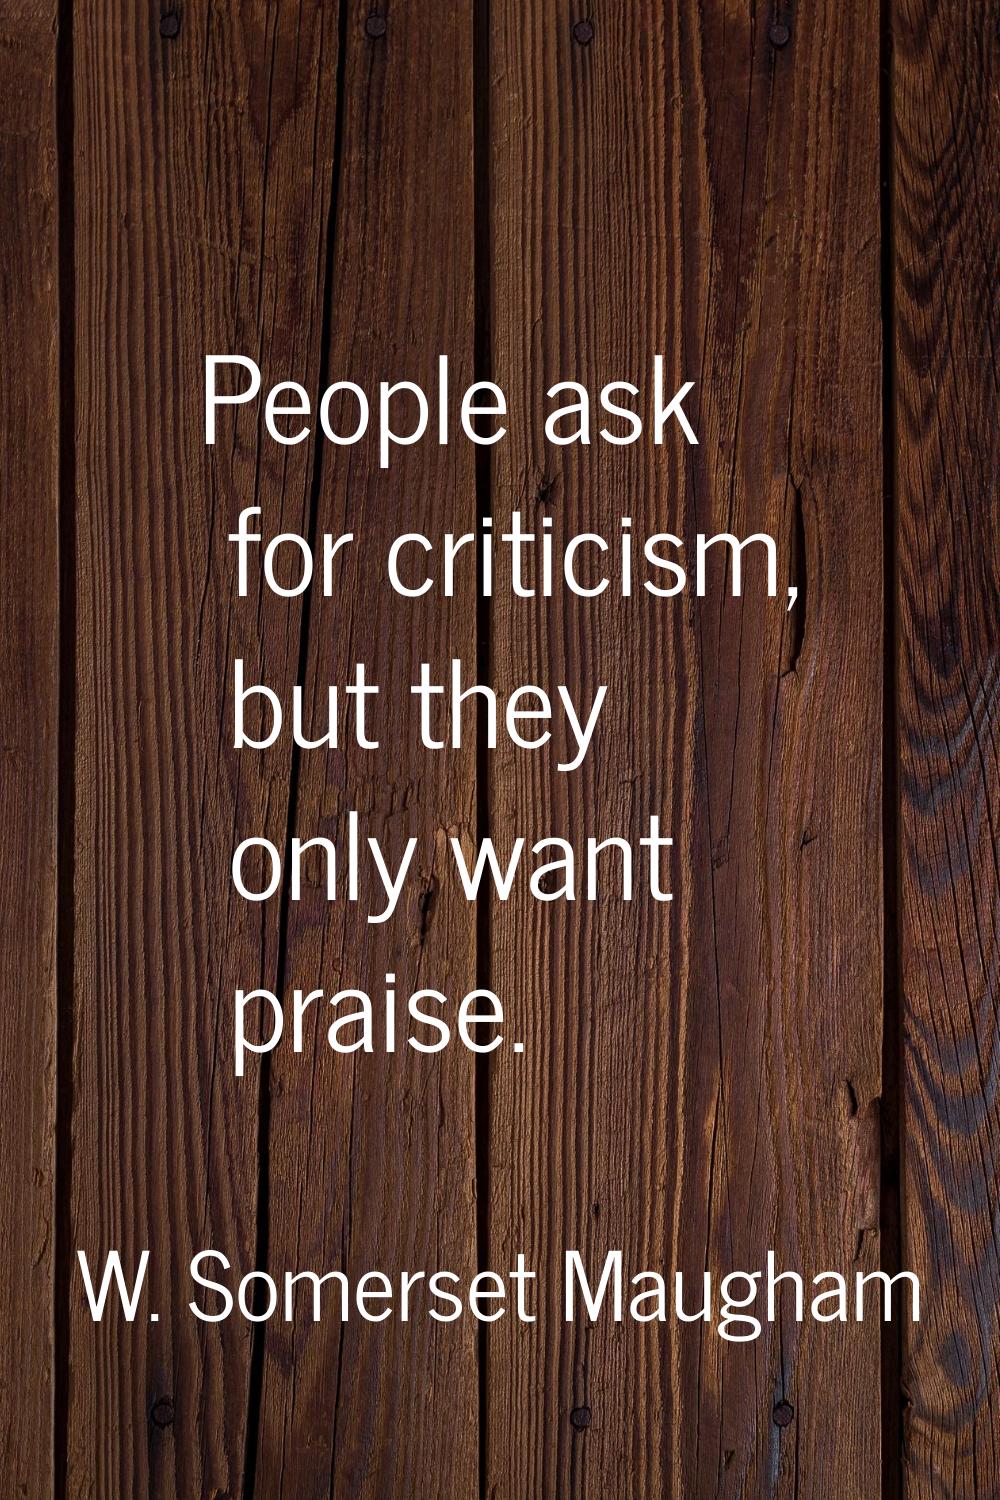 People ask for criticism, but they only want praise.